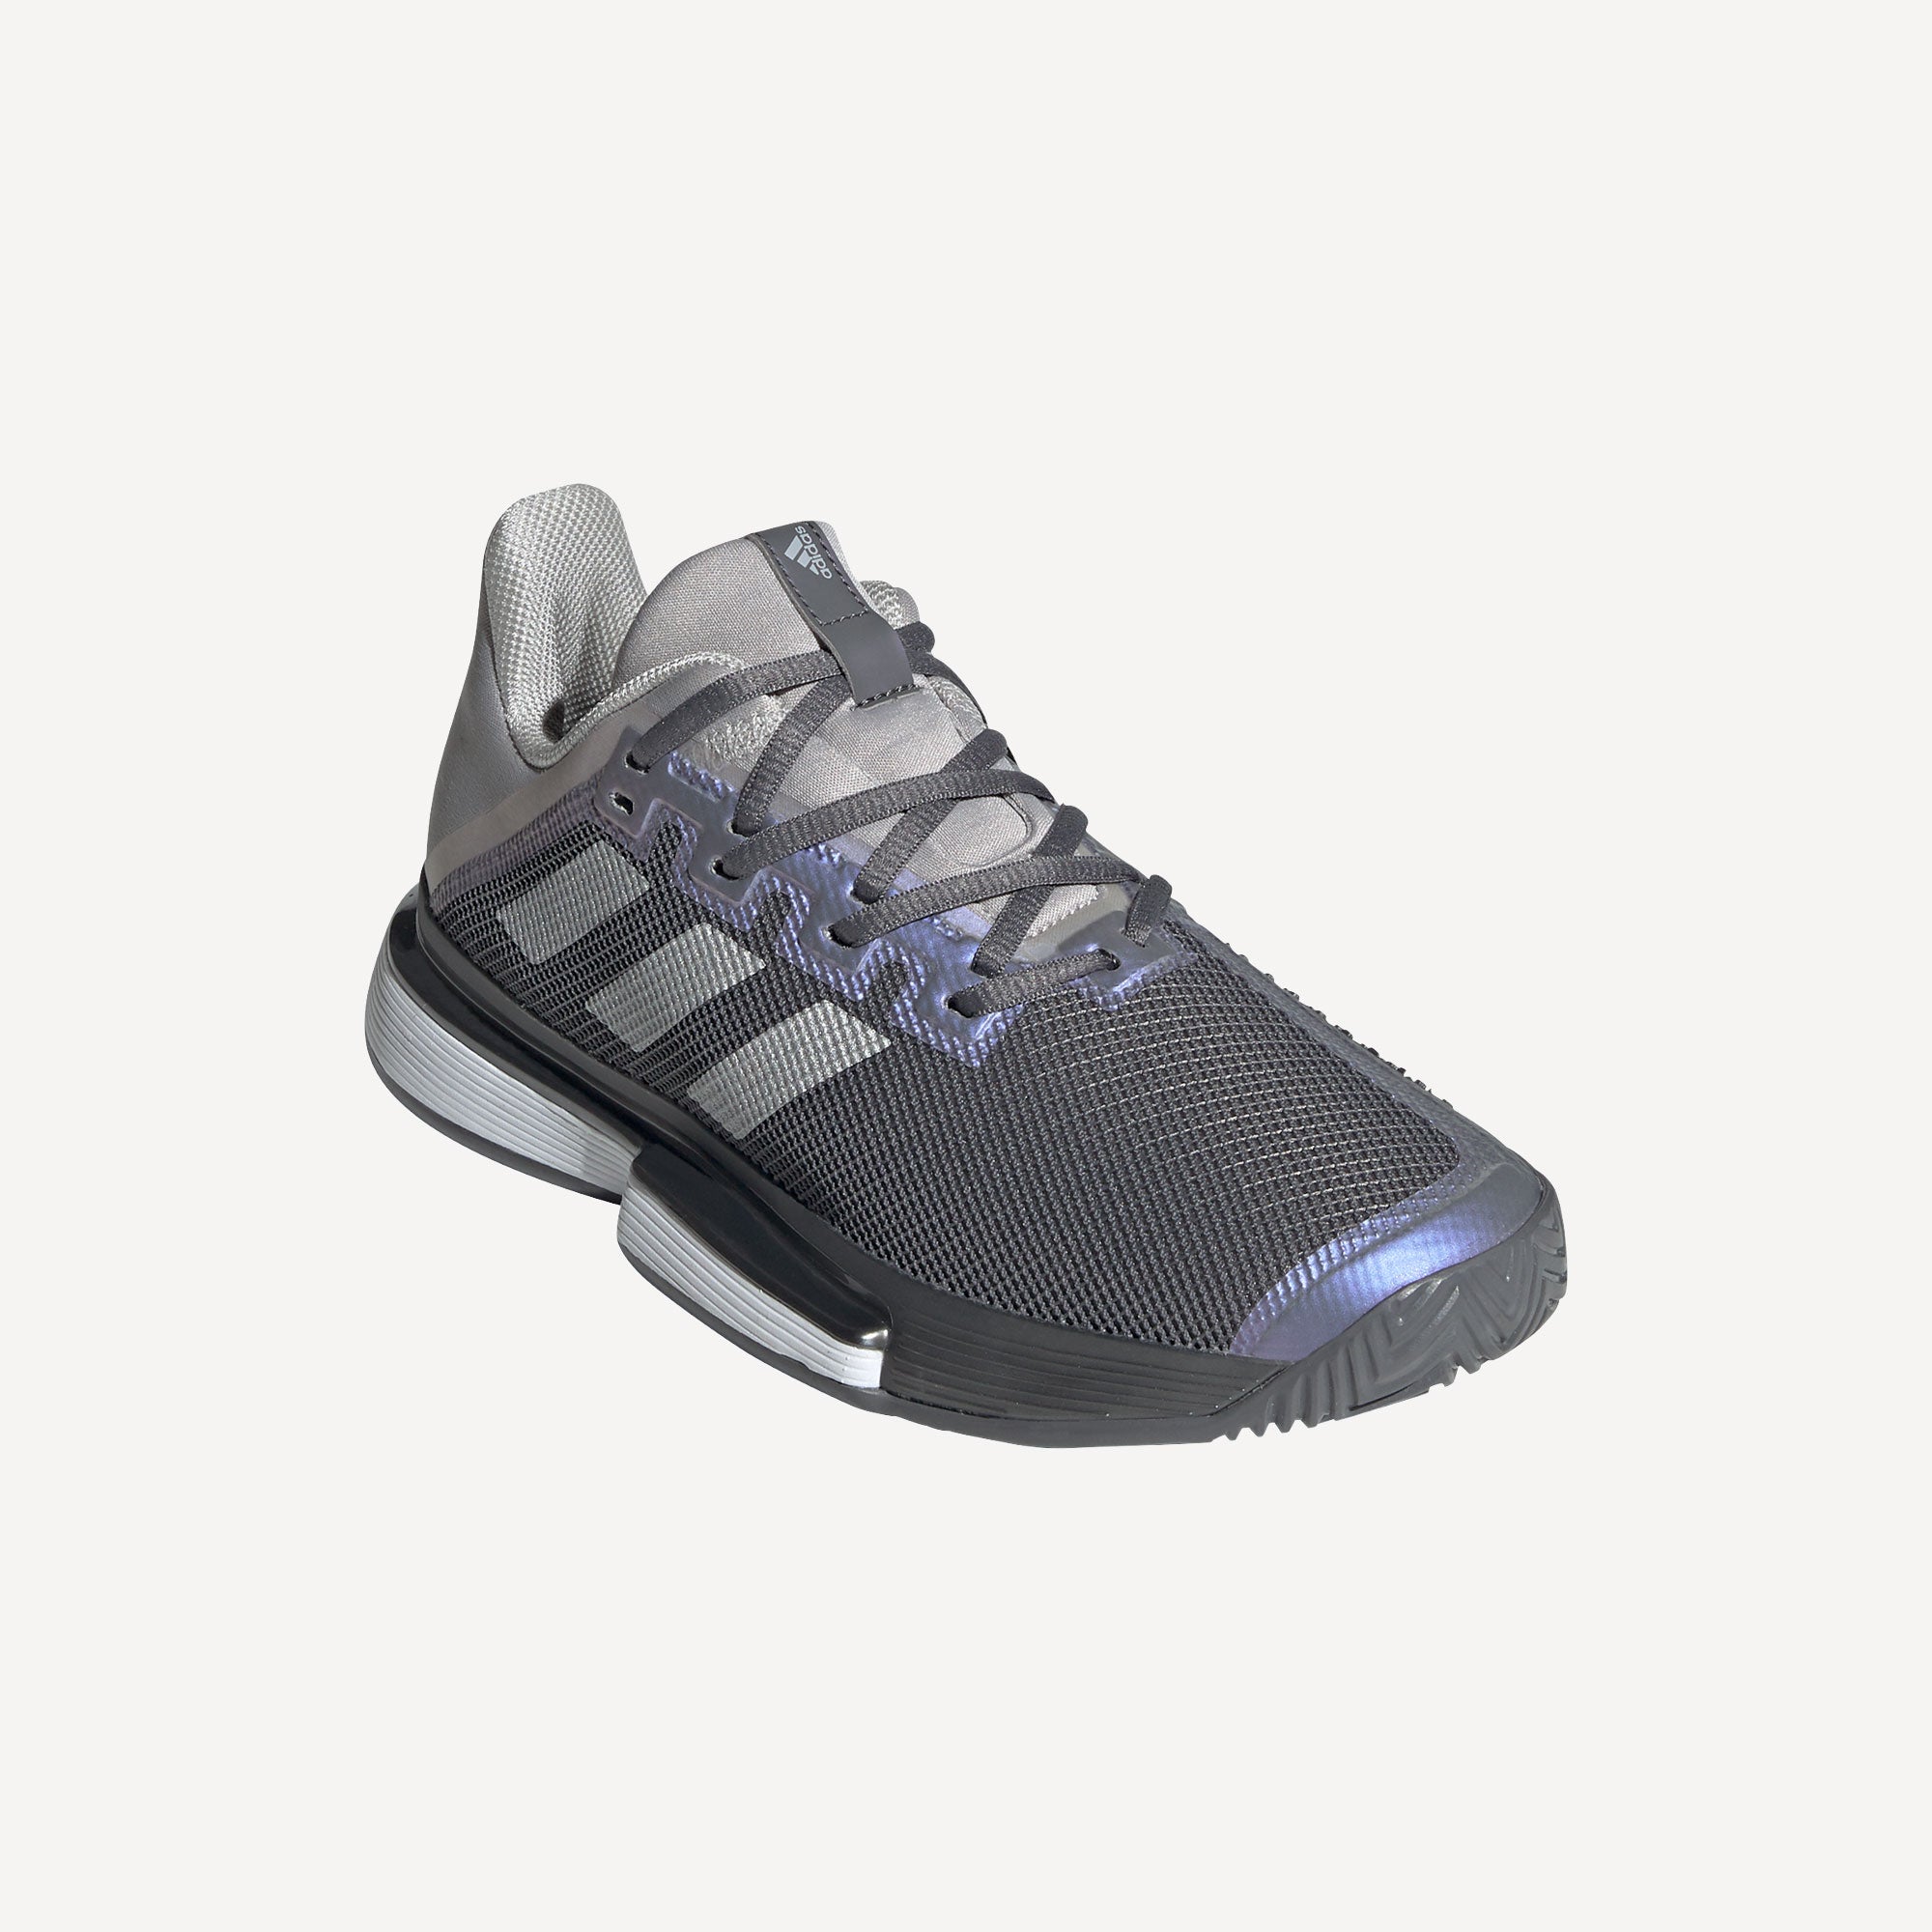 adidas SoleMatch Bounce Women's Clay Court Tennis Shoes Grey (4)